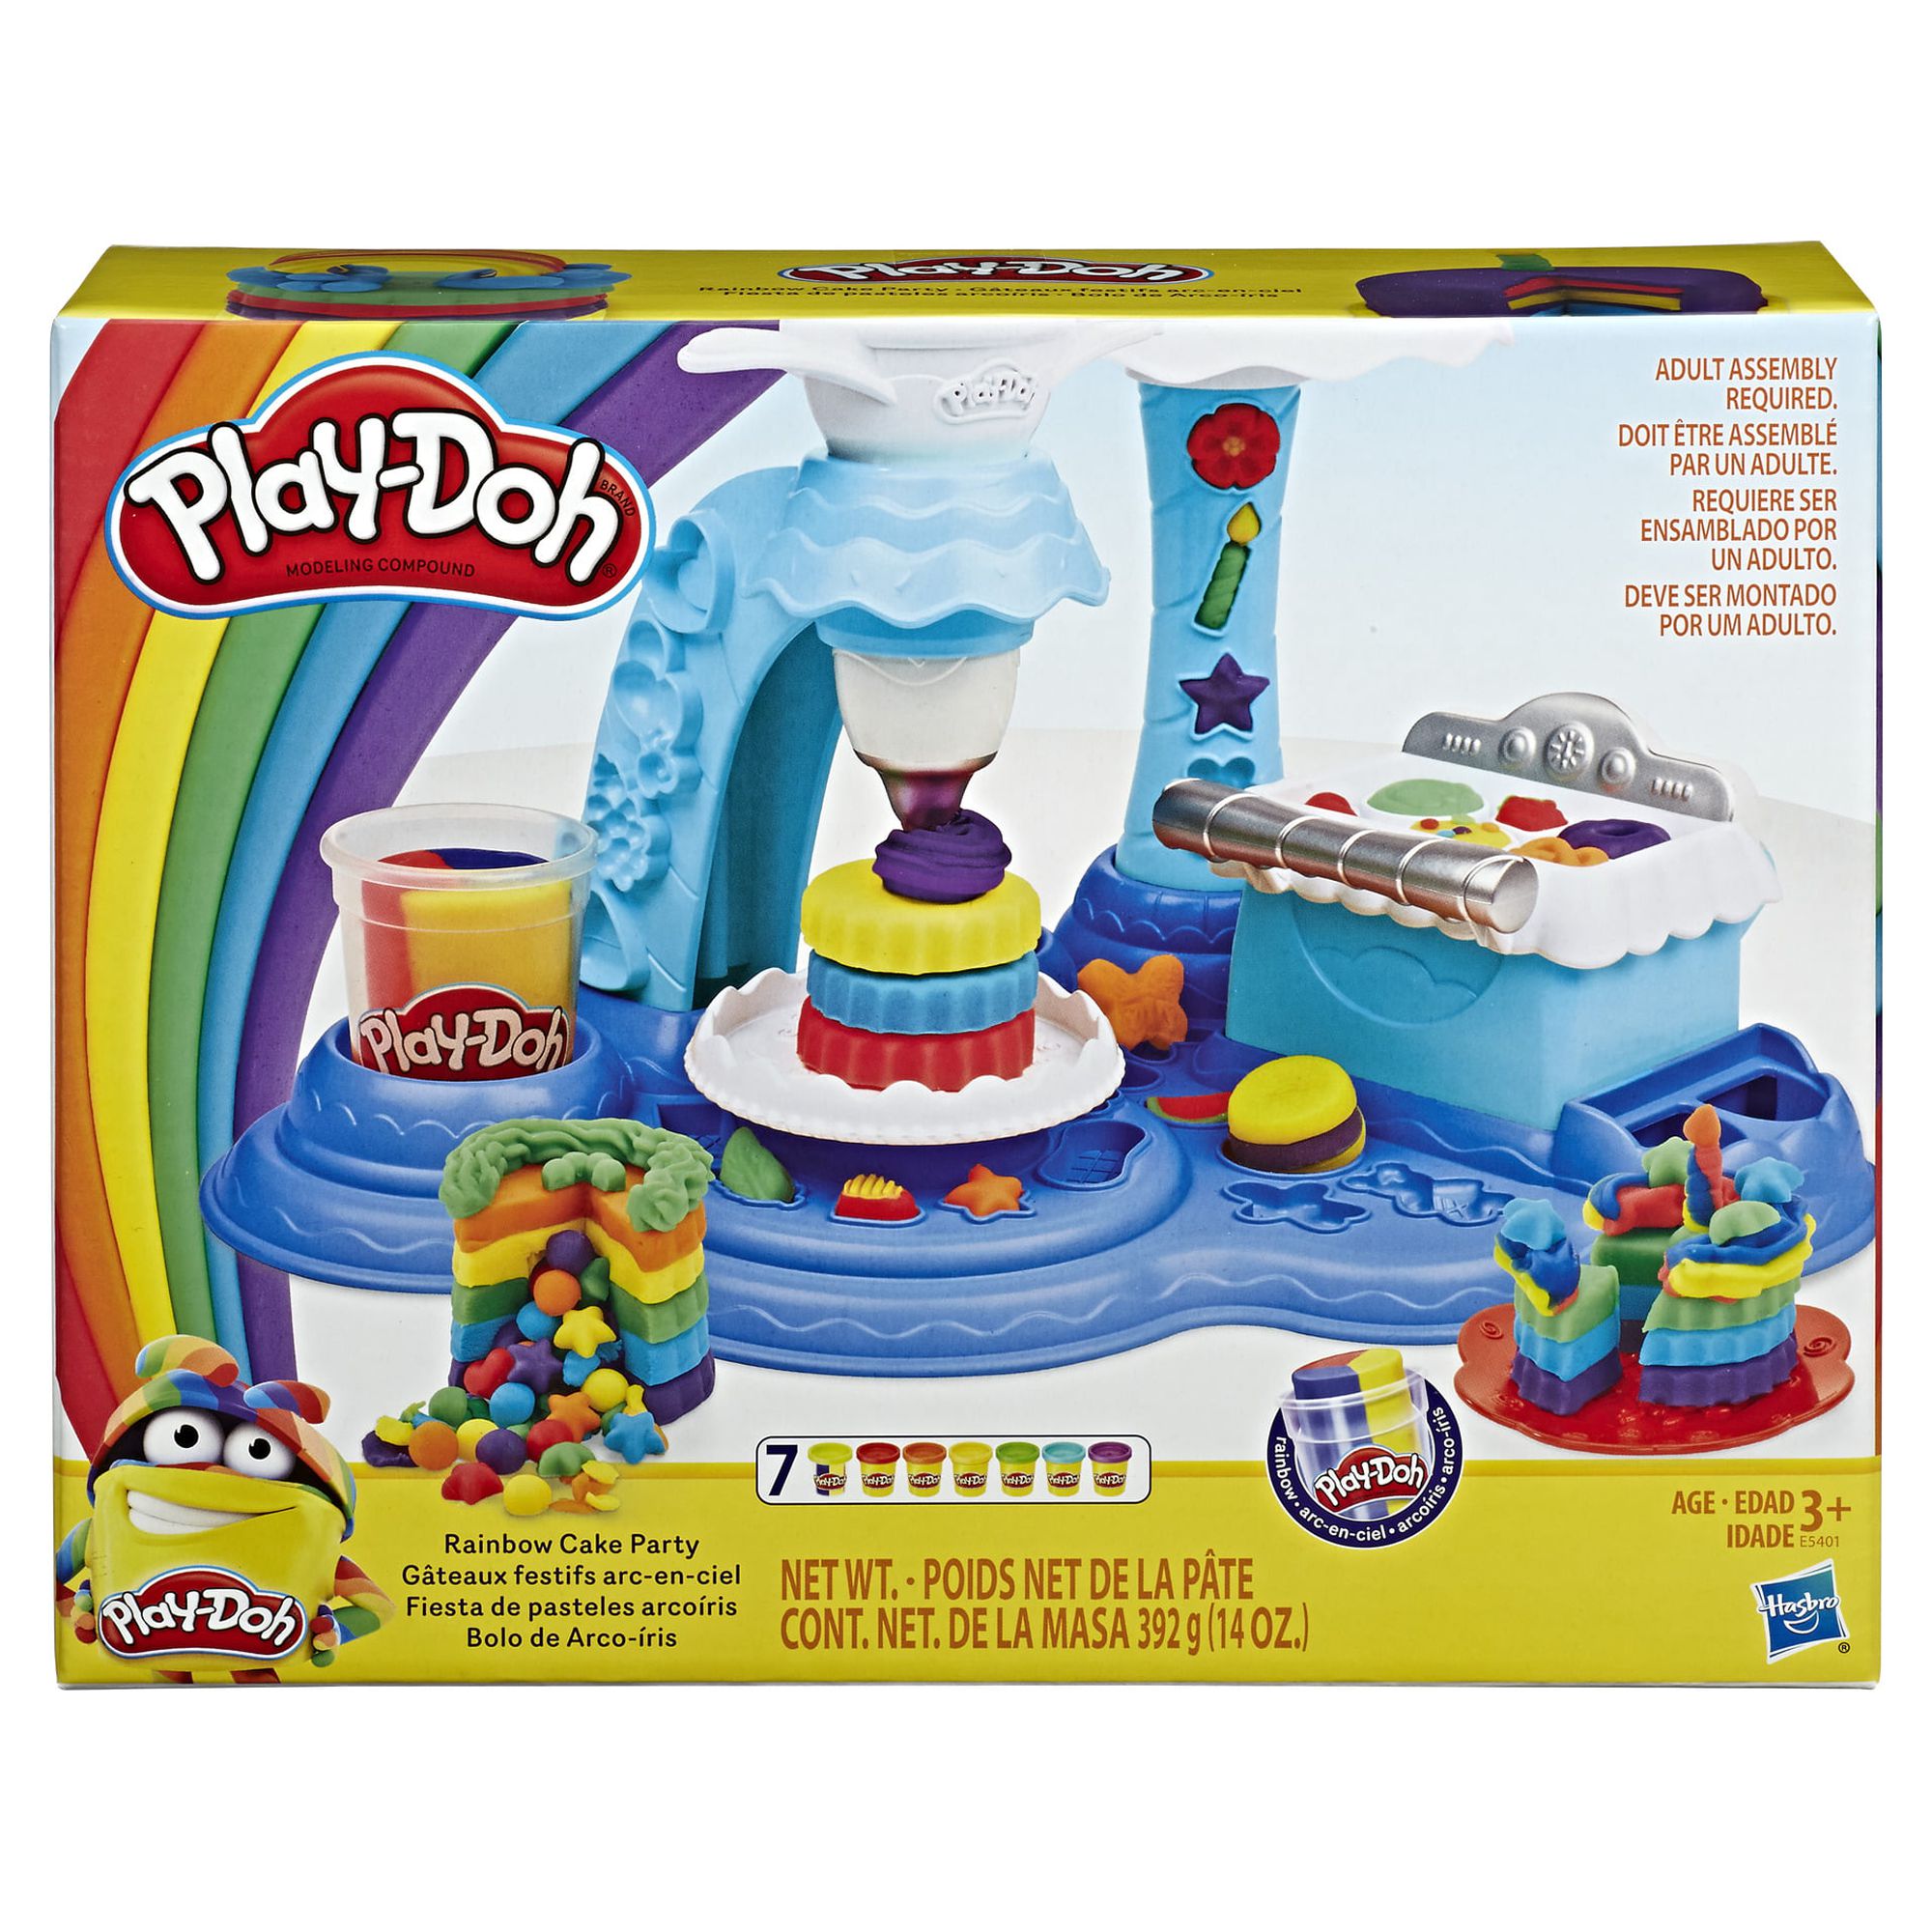 Play-Doh Rainbow Cake Set, 7 Cans of 3-in-1 (14 Ounces Total) - image 2 of 12